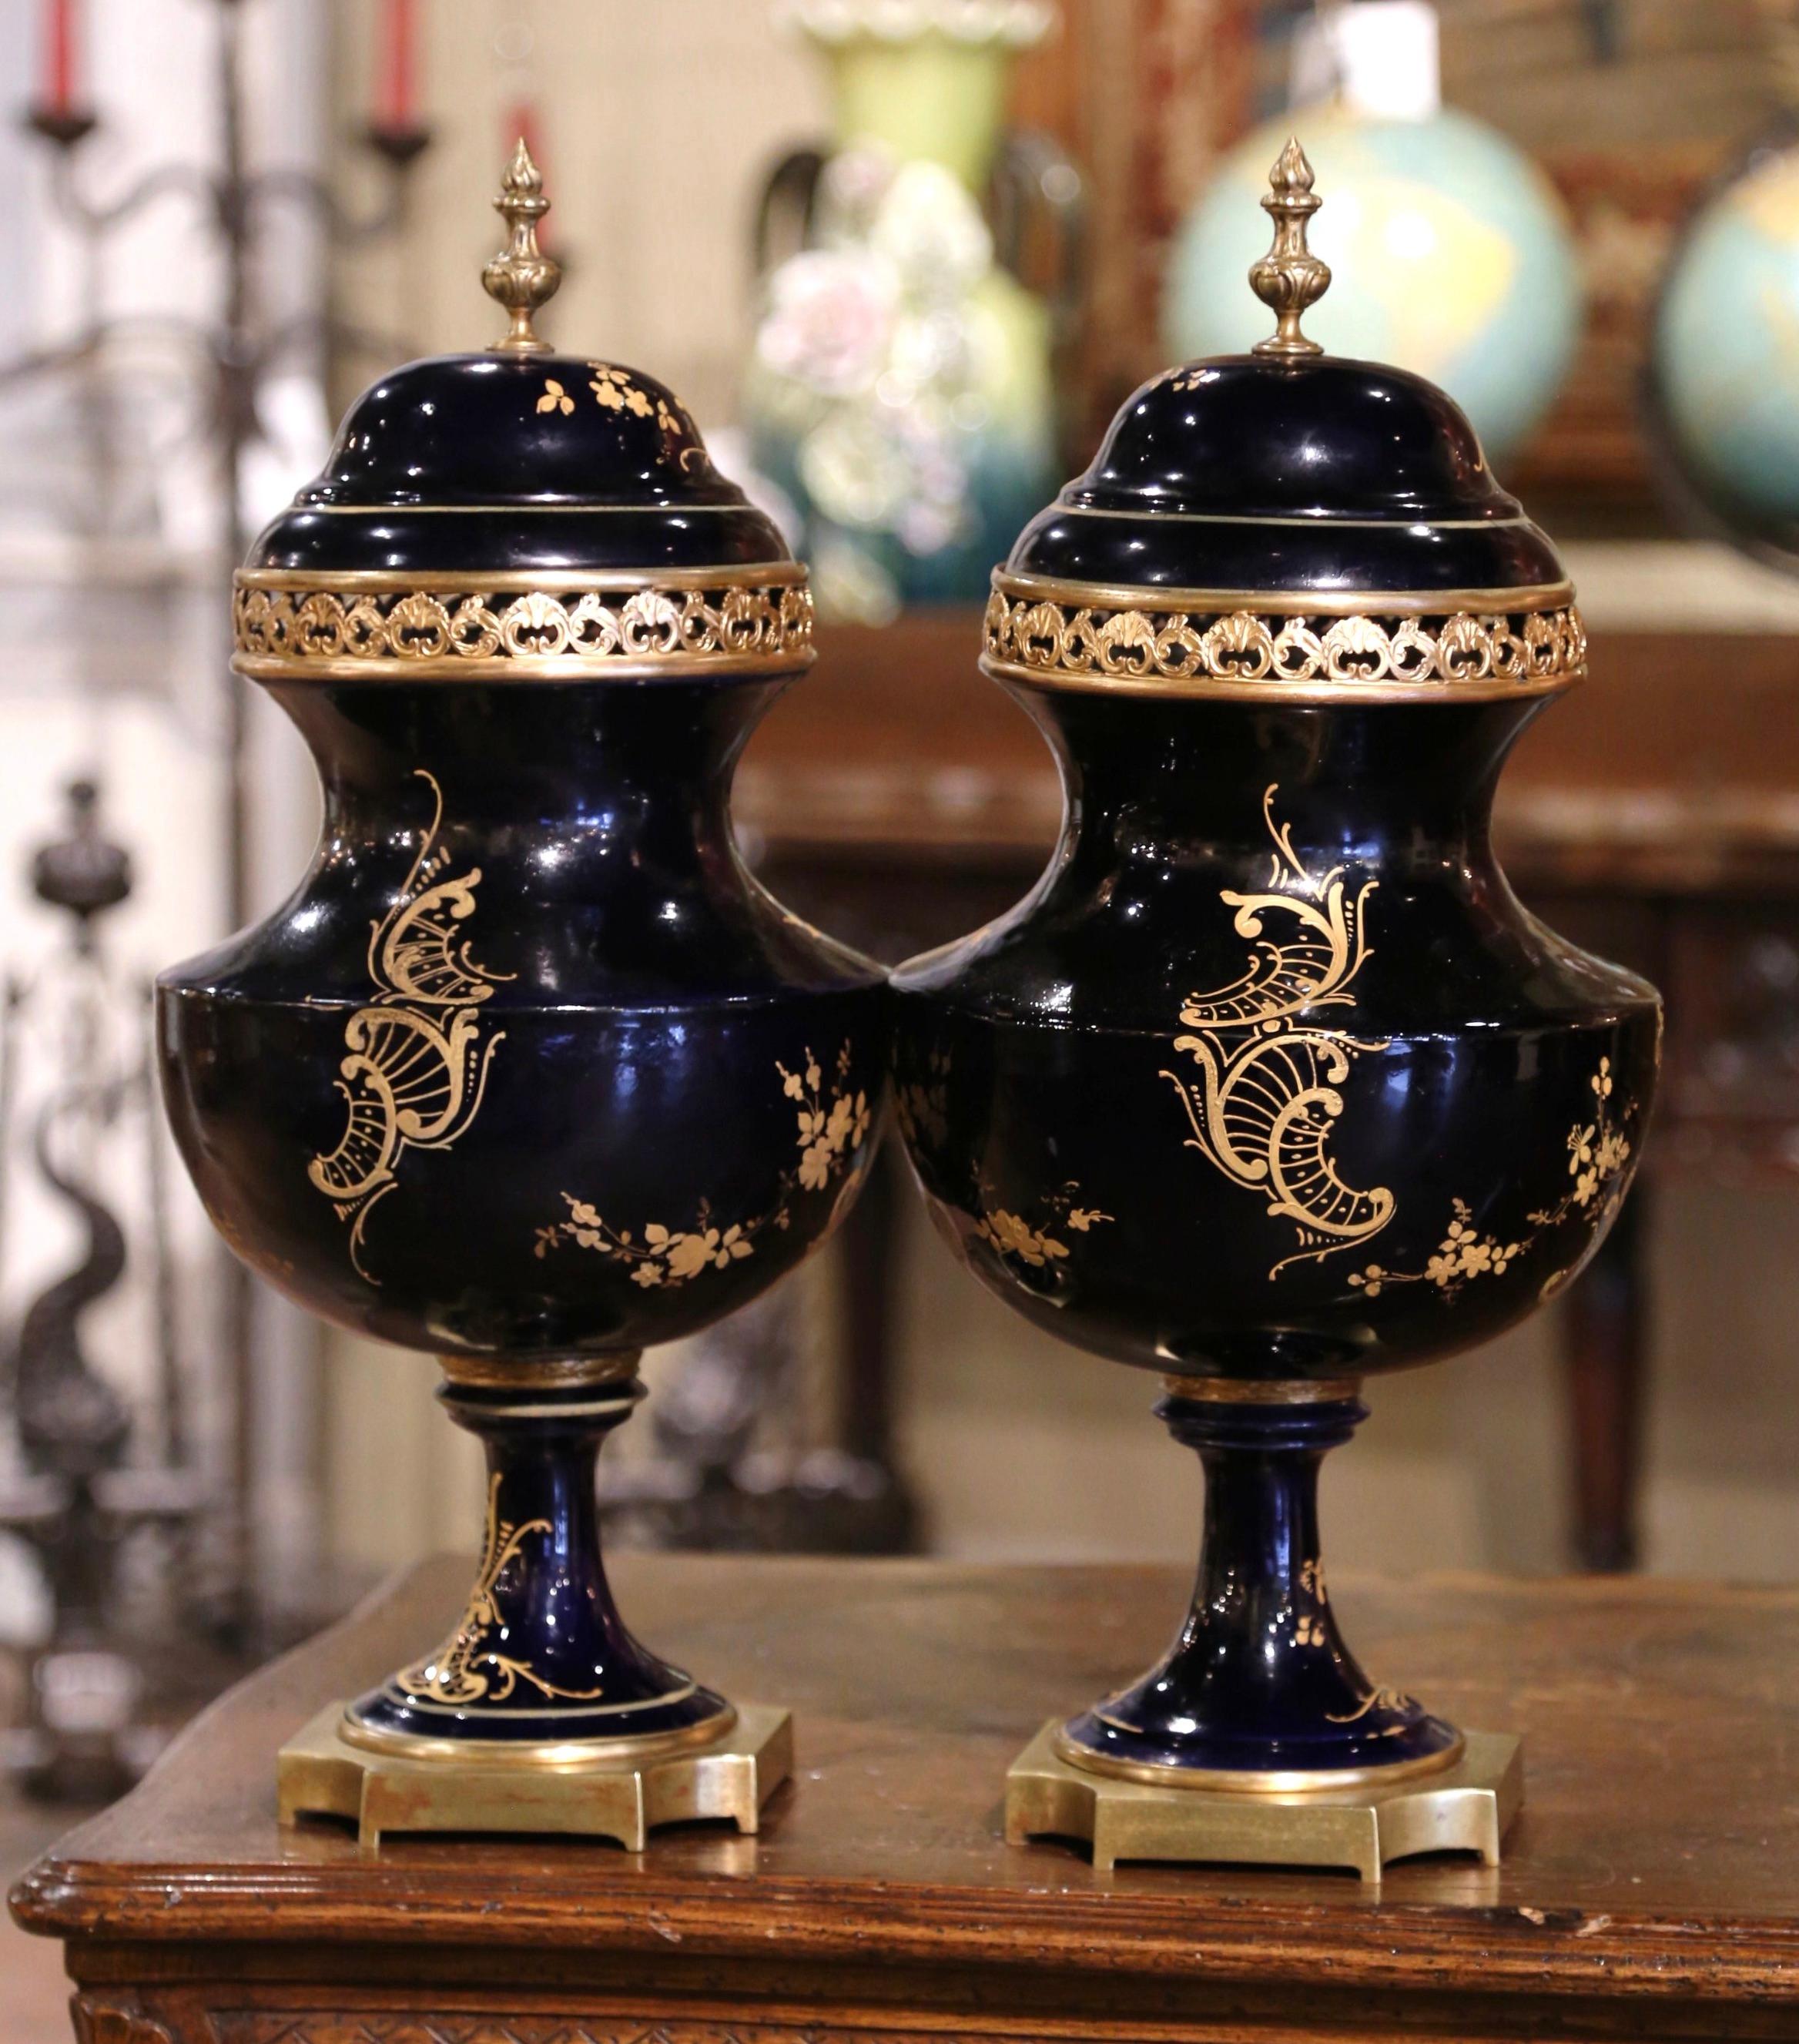 Pair of 19th Century French Sevres Royal Blue Porcelain & Bronze Covered Urns For Sale 3